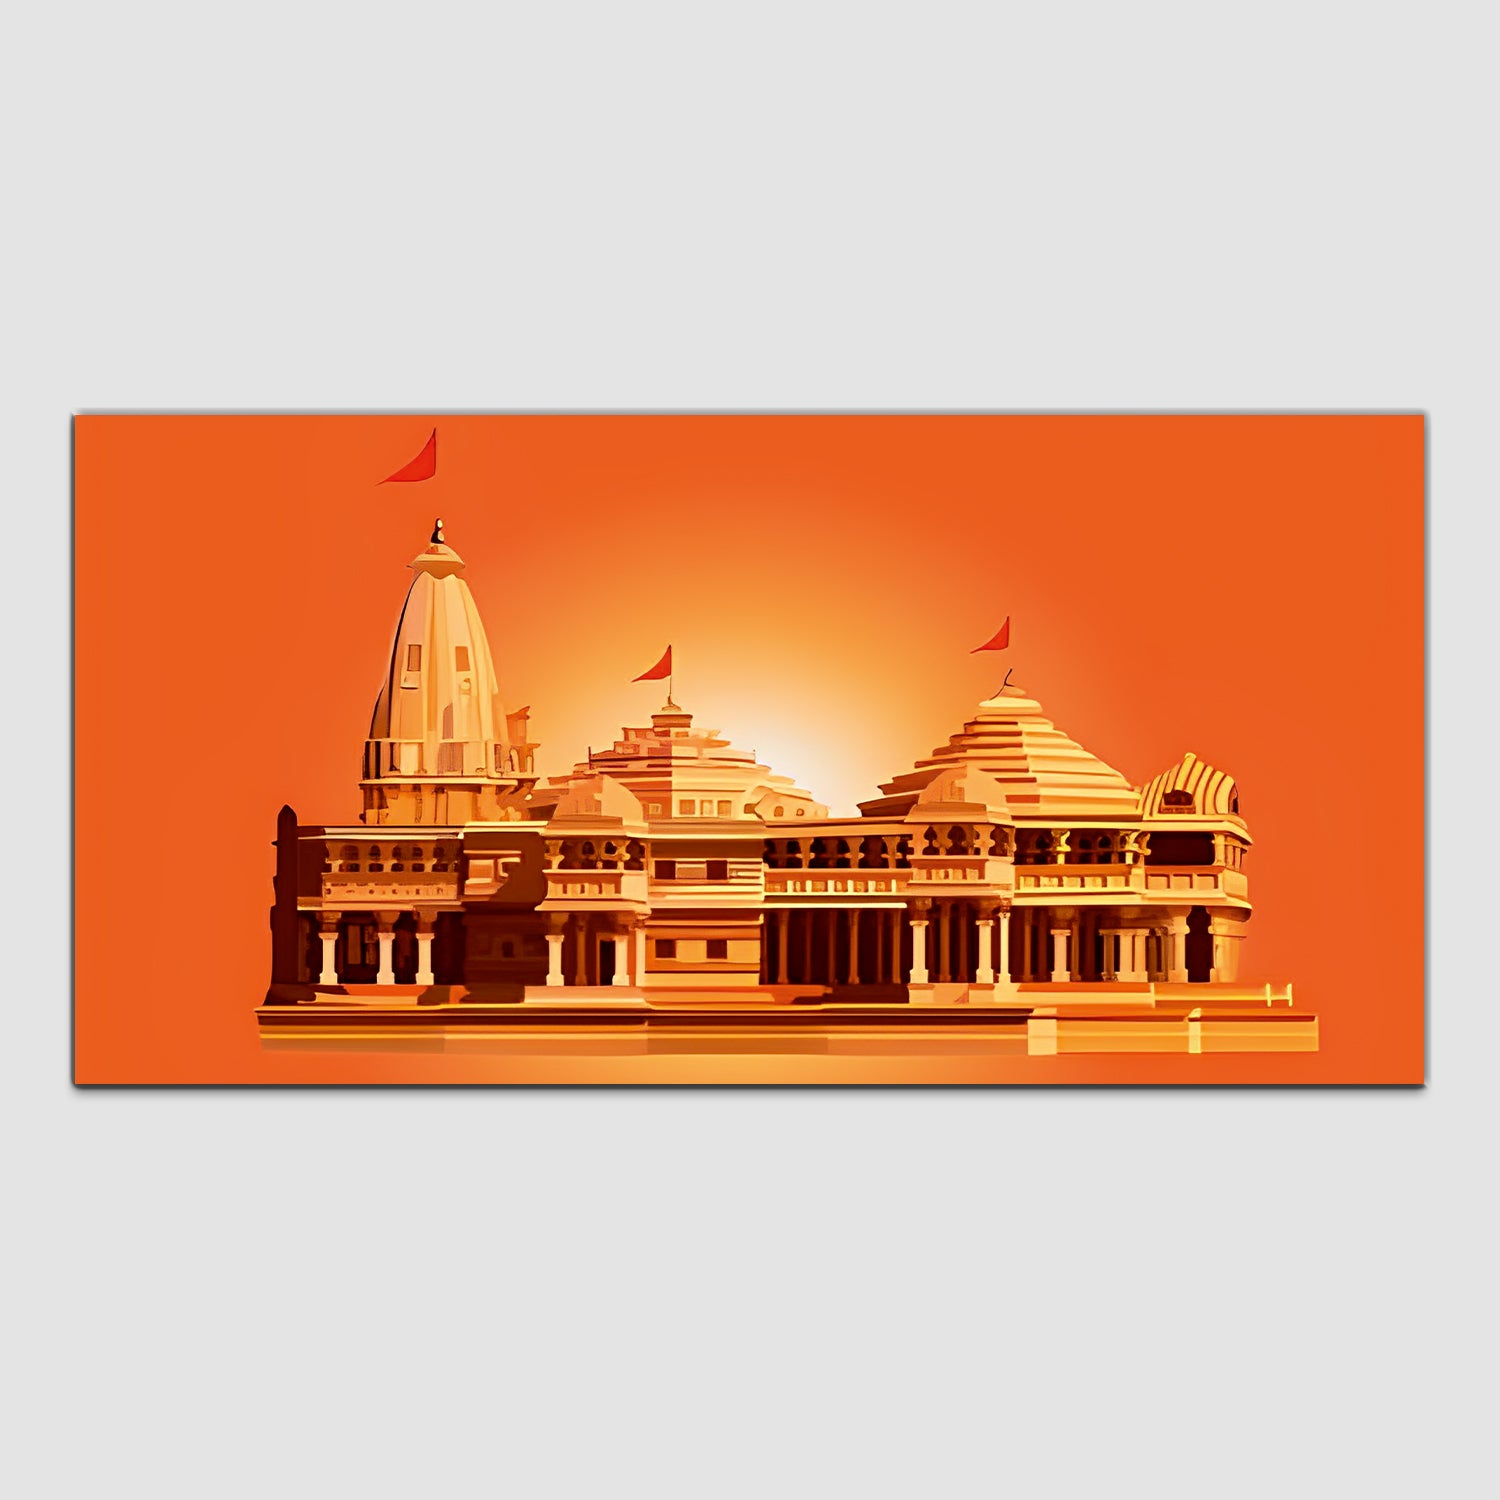 Shree Ram tample off White & Yellow Wall Art Painting.